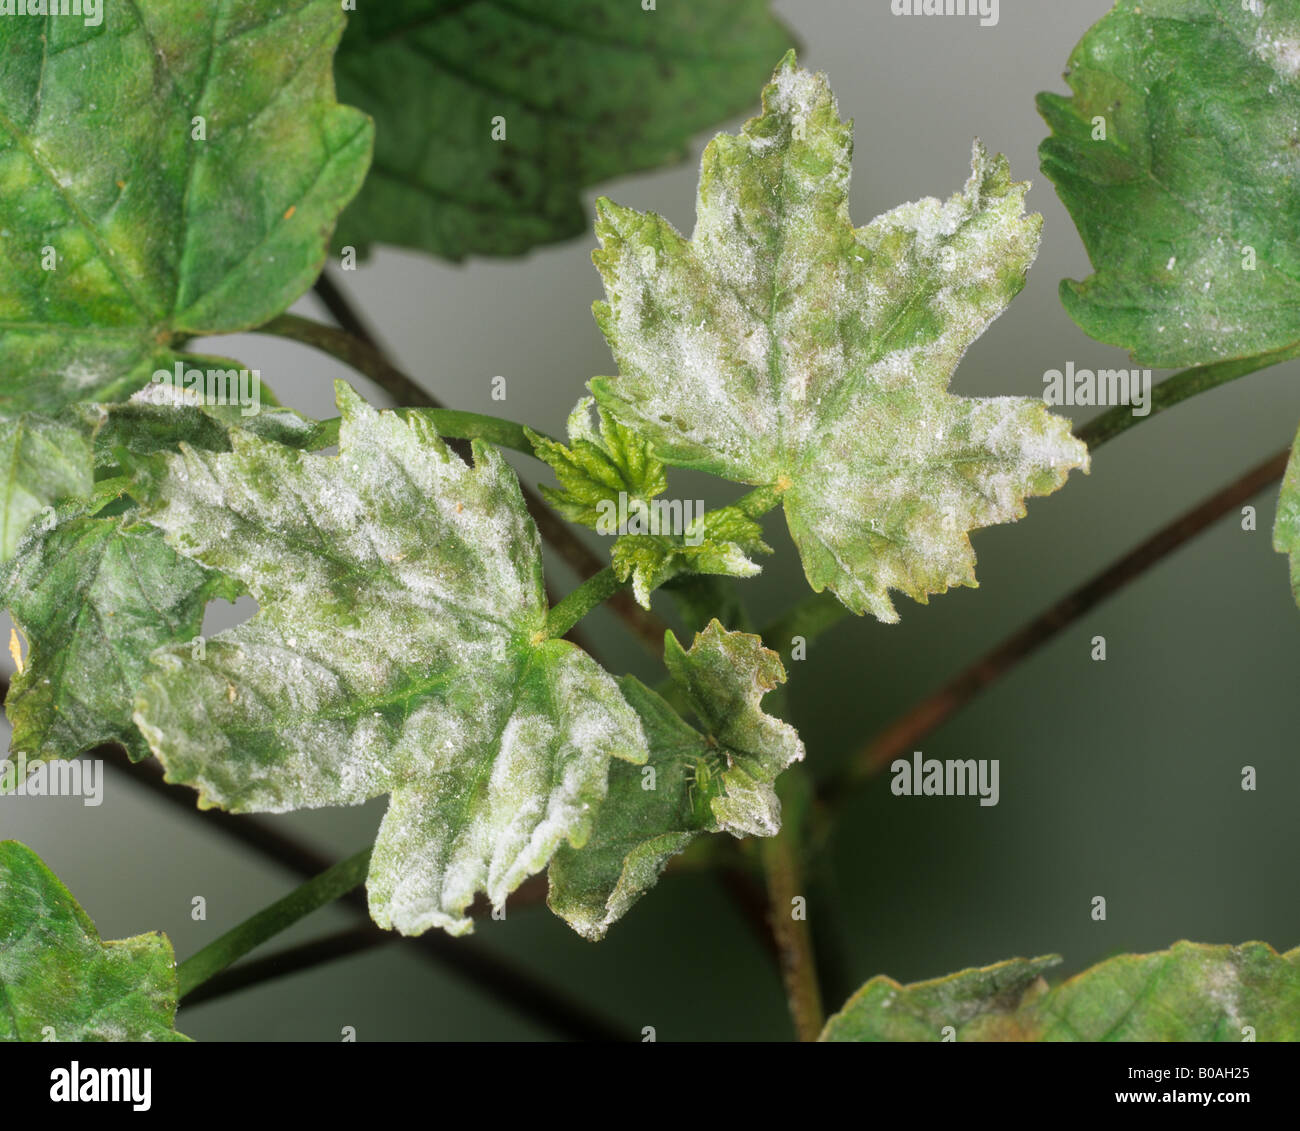 Powdery mildew Erysiphe plantani on young sycamore leaves Stock Photo